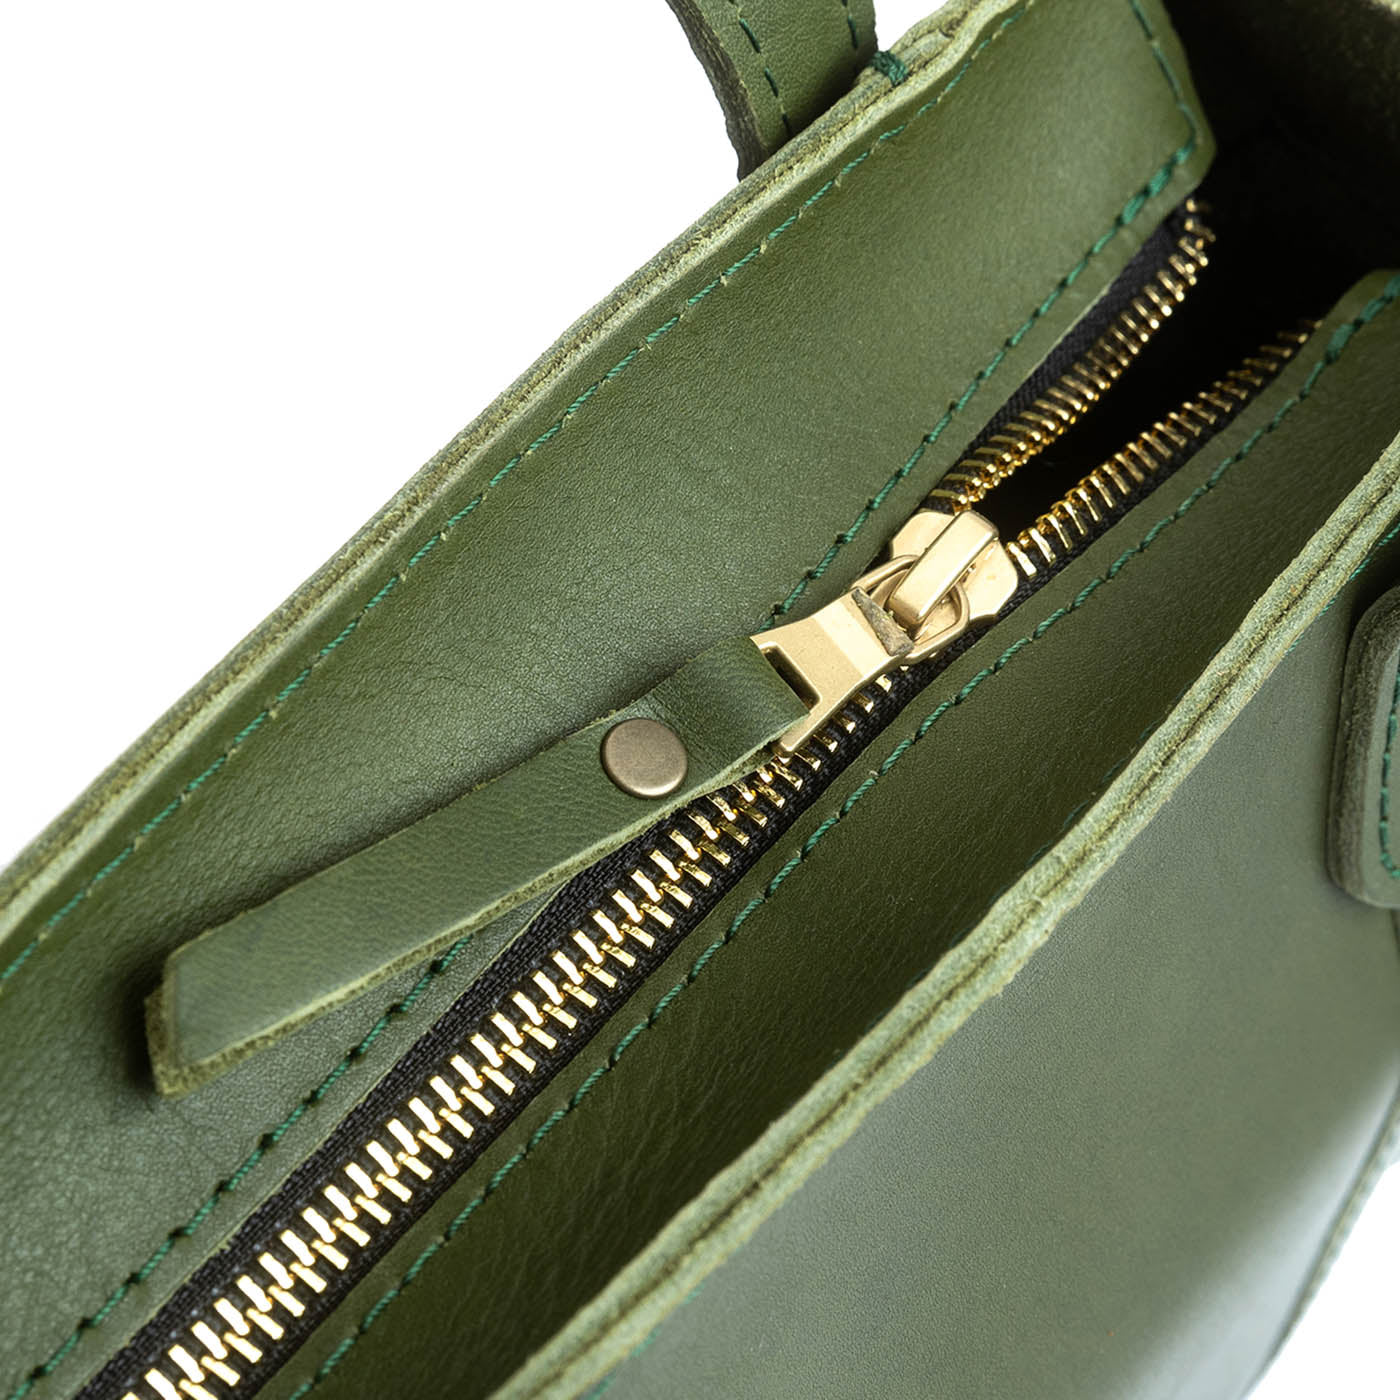 Pine*Zipper | Structured mid-size tote bag with overlapping panels and crossbody strap